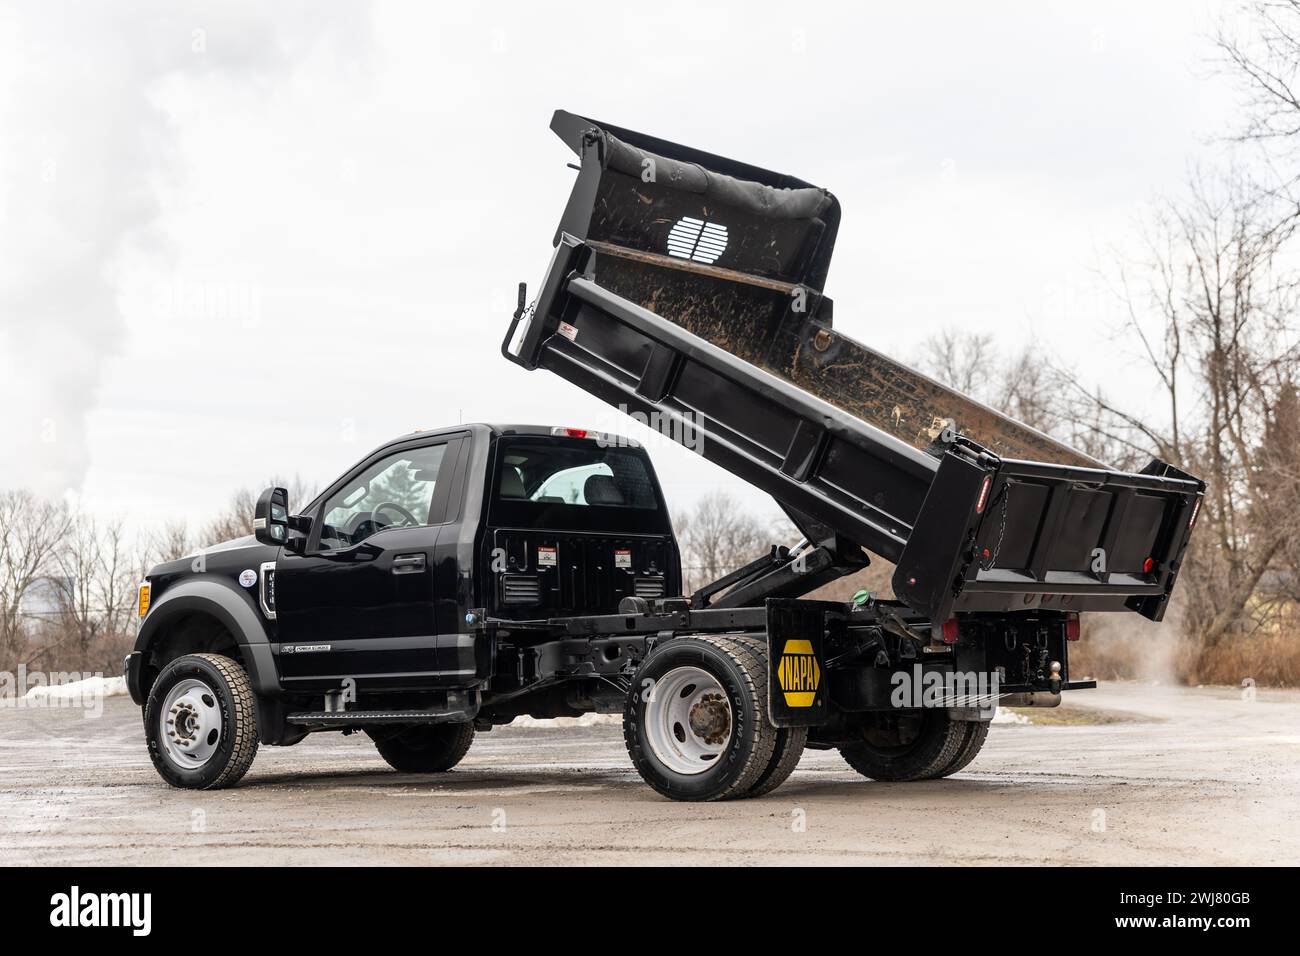 Black pickup truck with dump truck bed and attached trailer Stock Photo